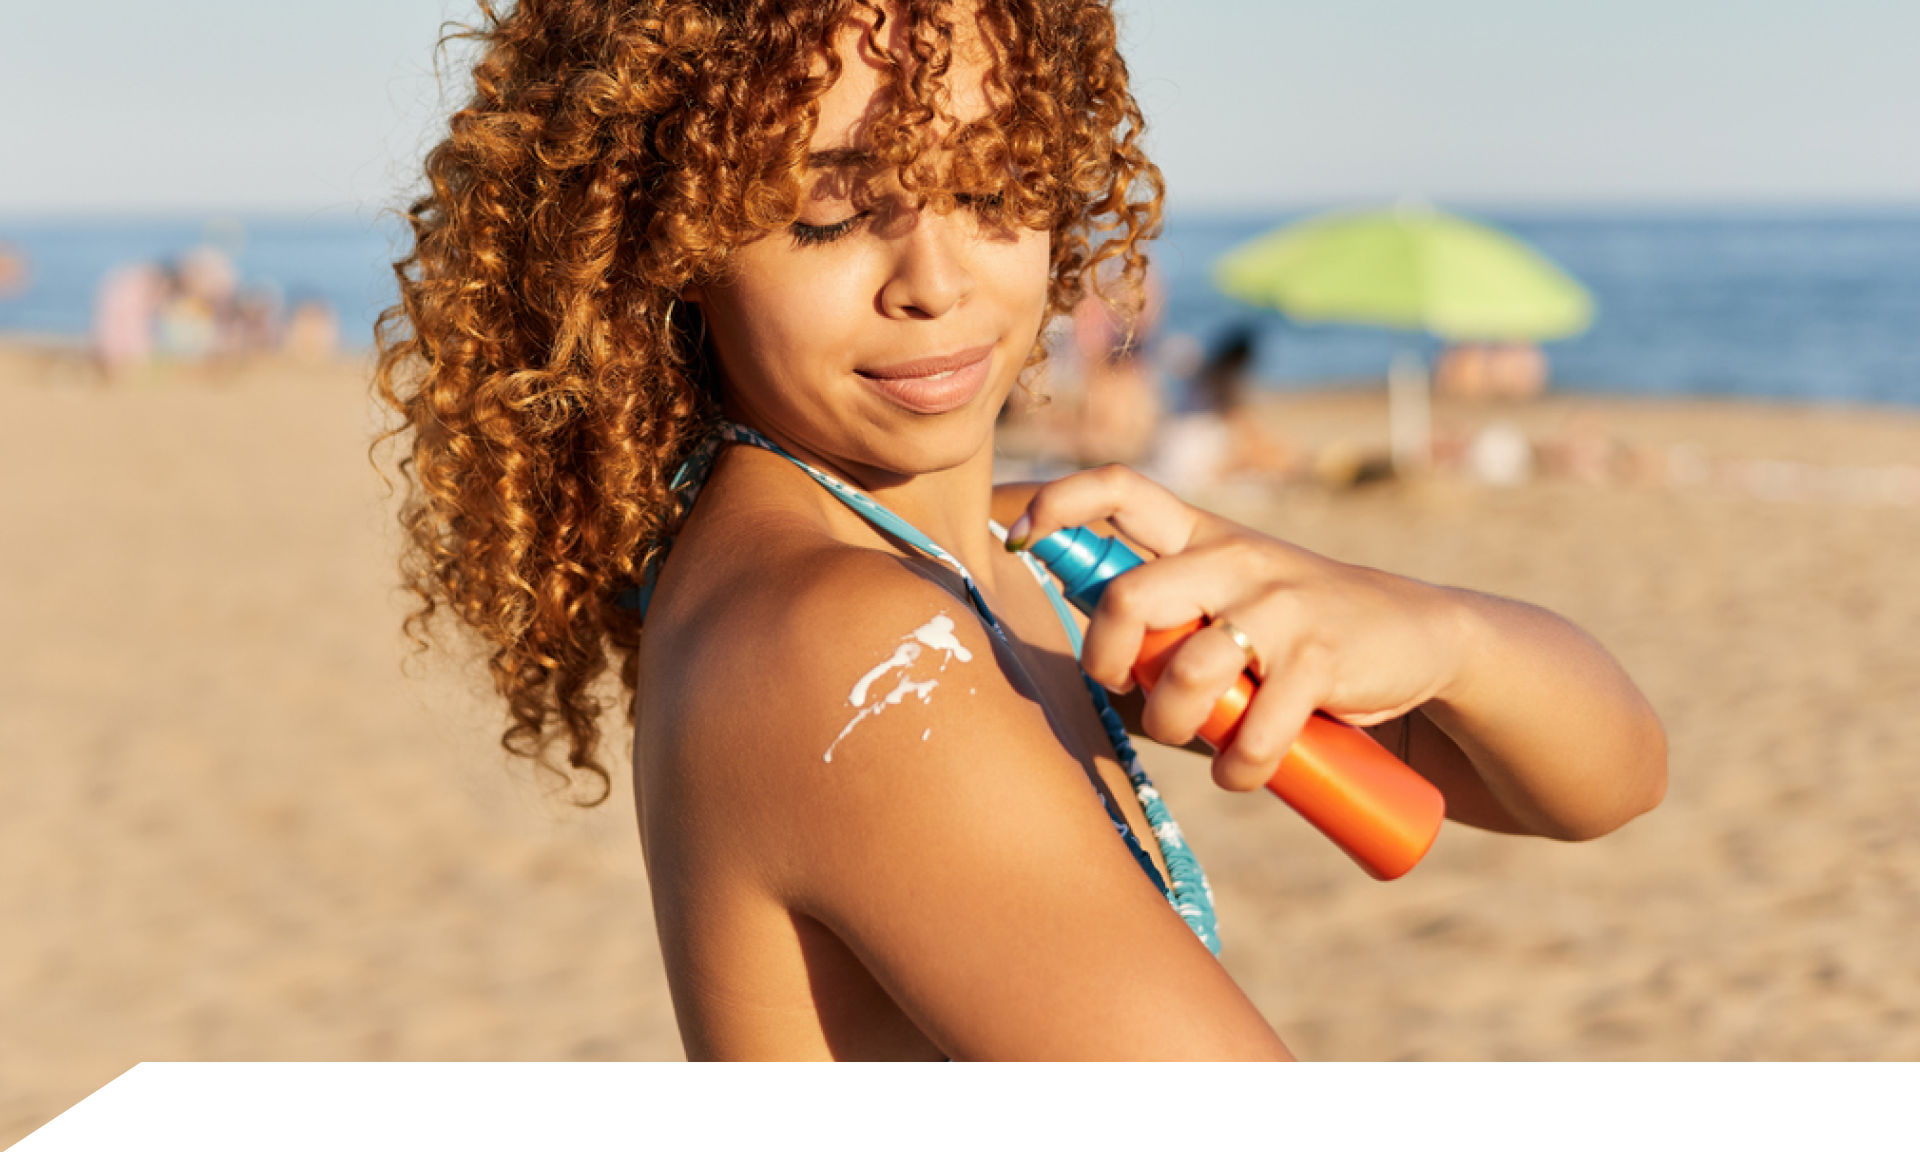 A woman applying sunscreen to her shoulder at a beach